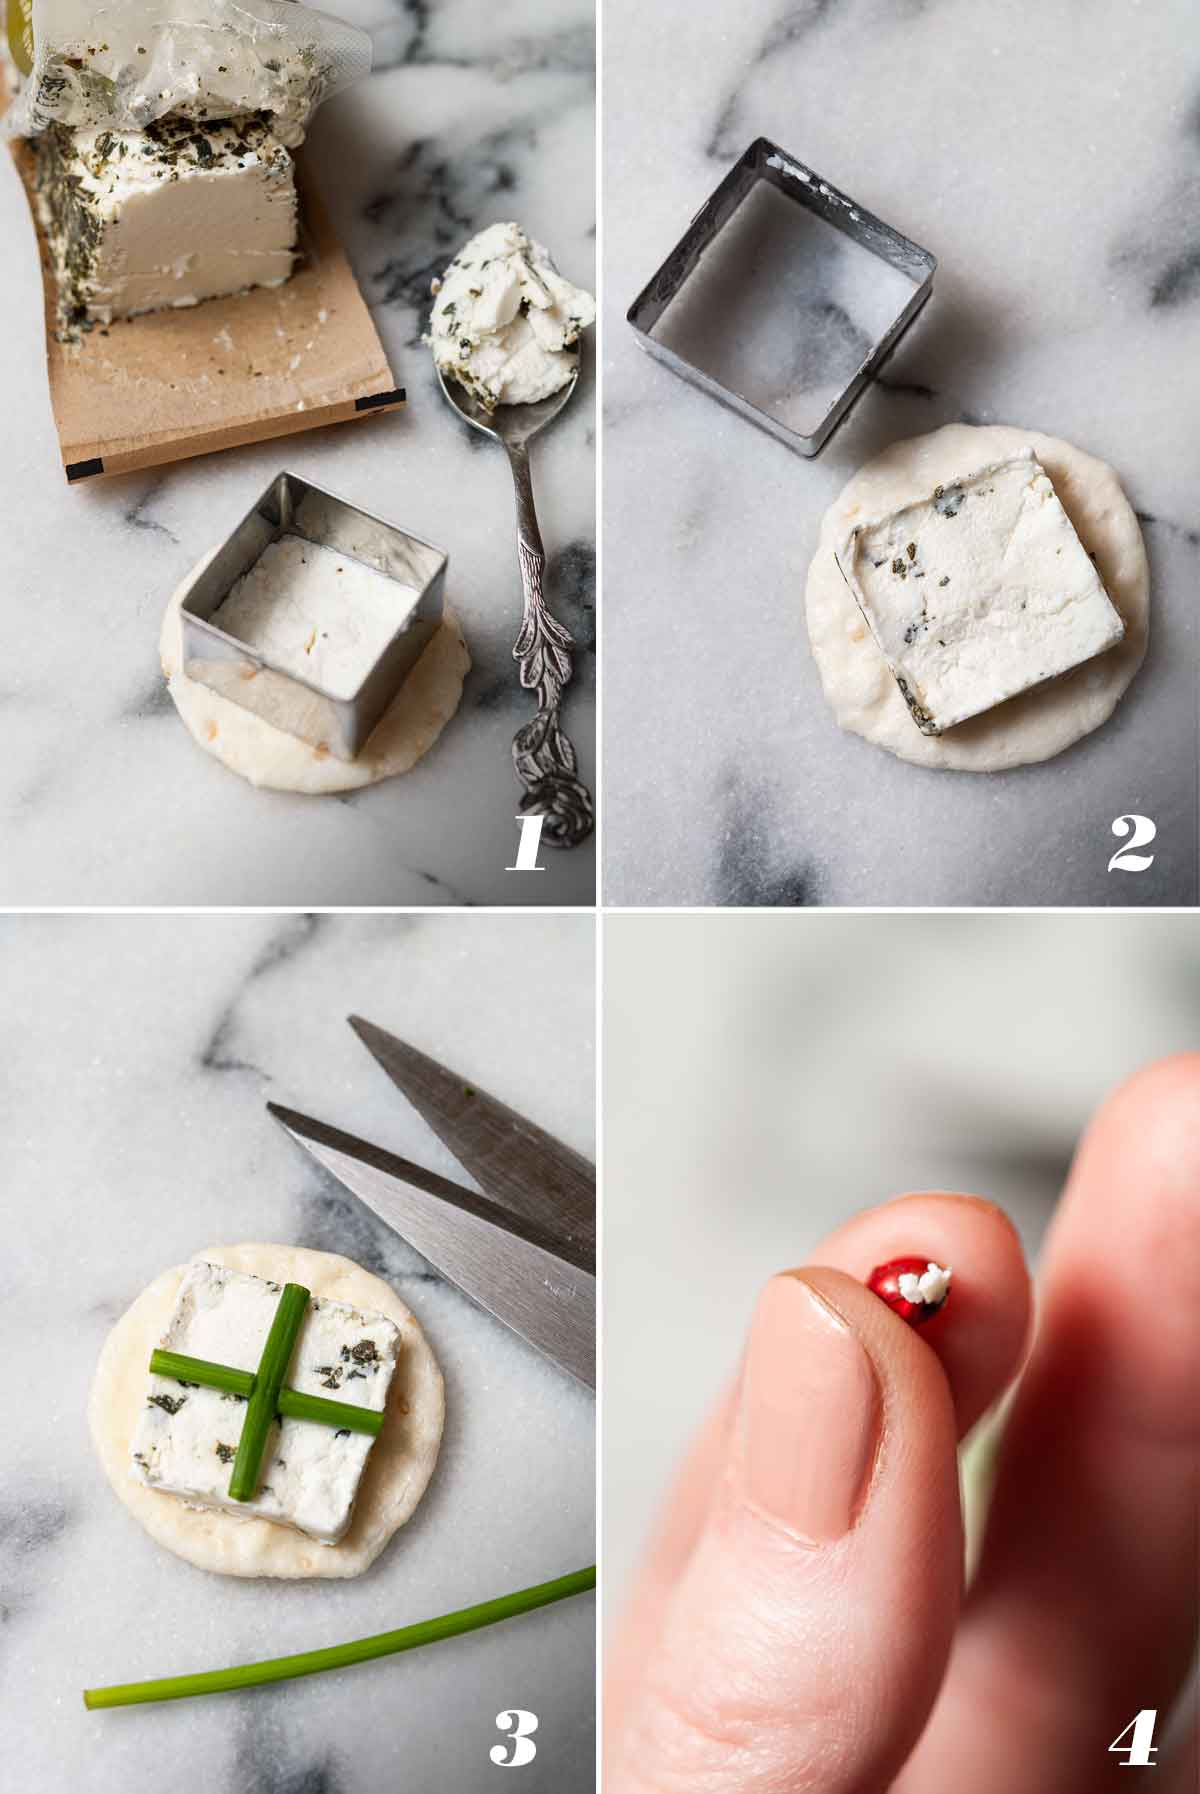 A collage of 4 numbered images showing how to make goat cheese present appetizers.